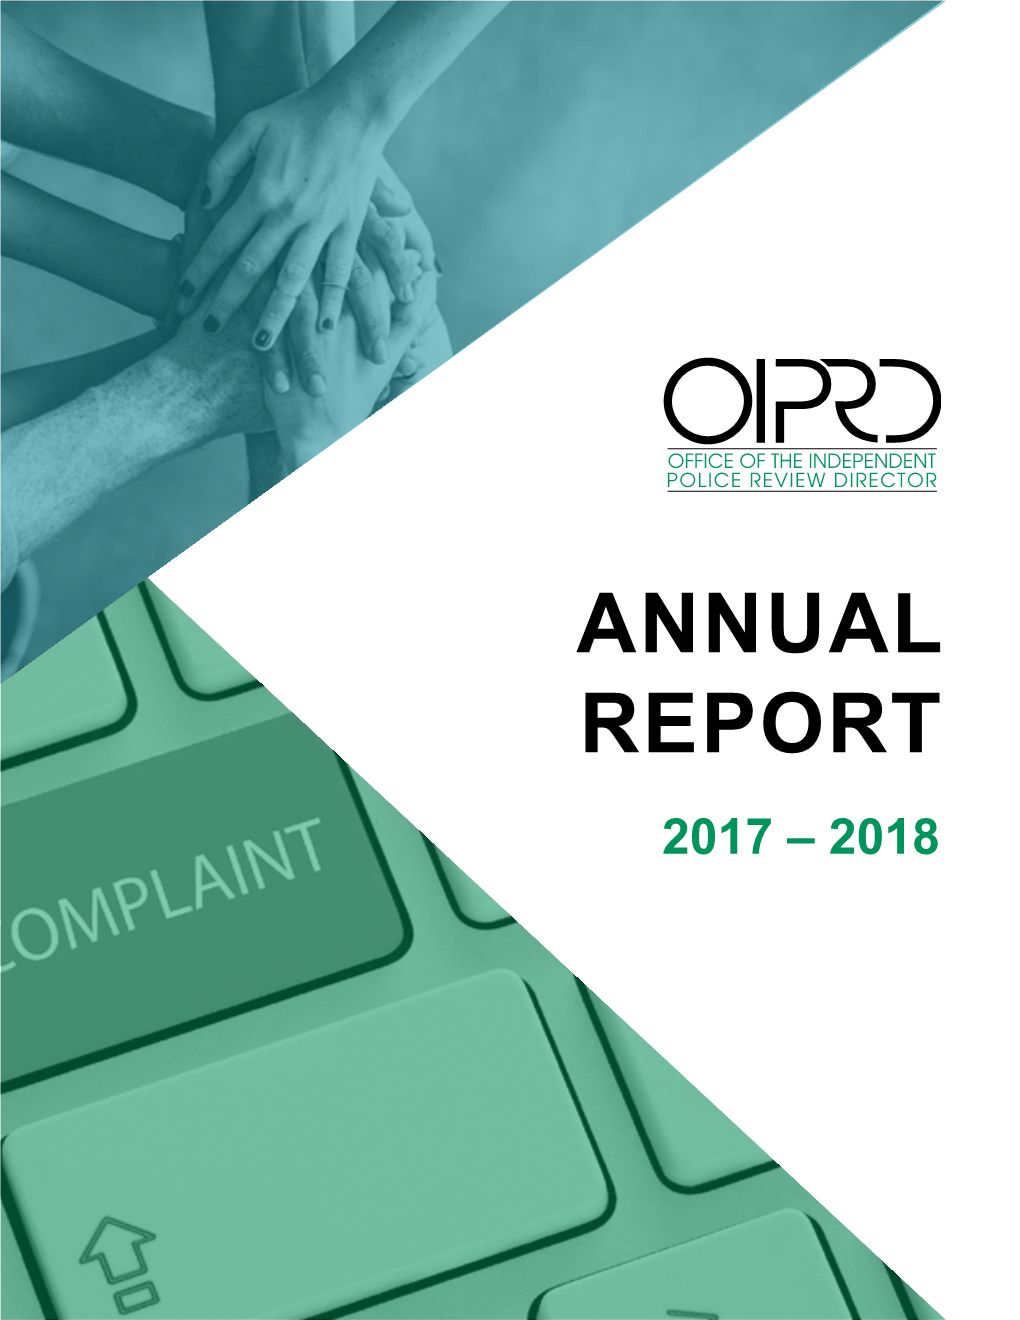 Annual Report 2017 – 2018 Police Complaints Statistics